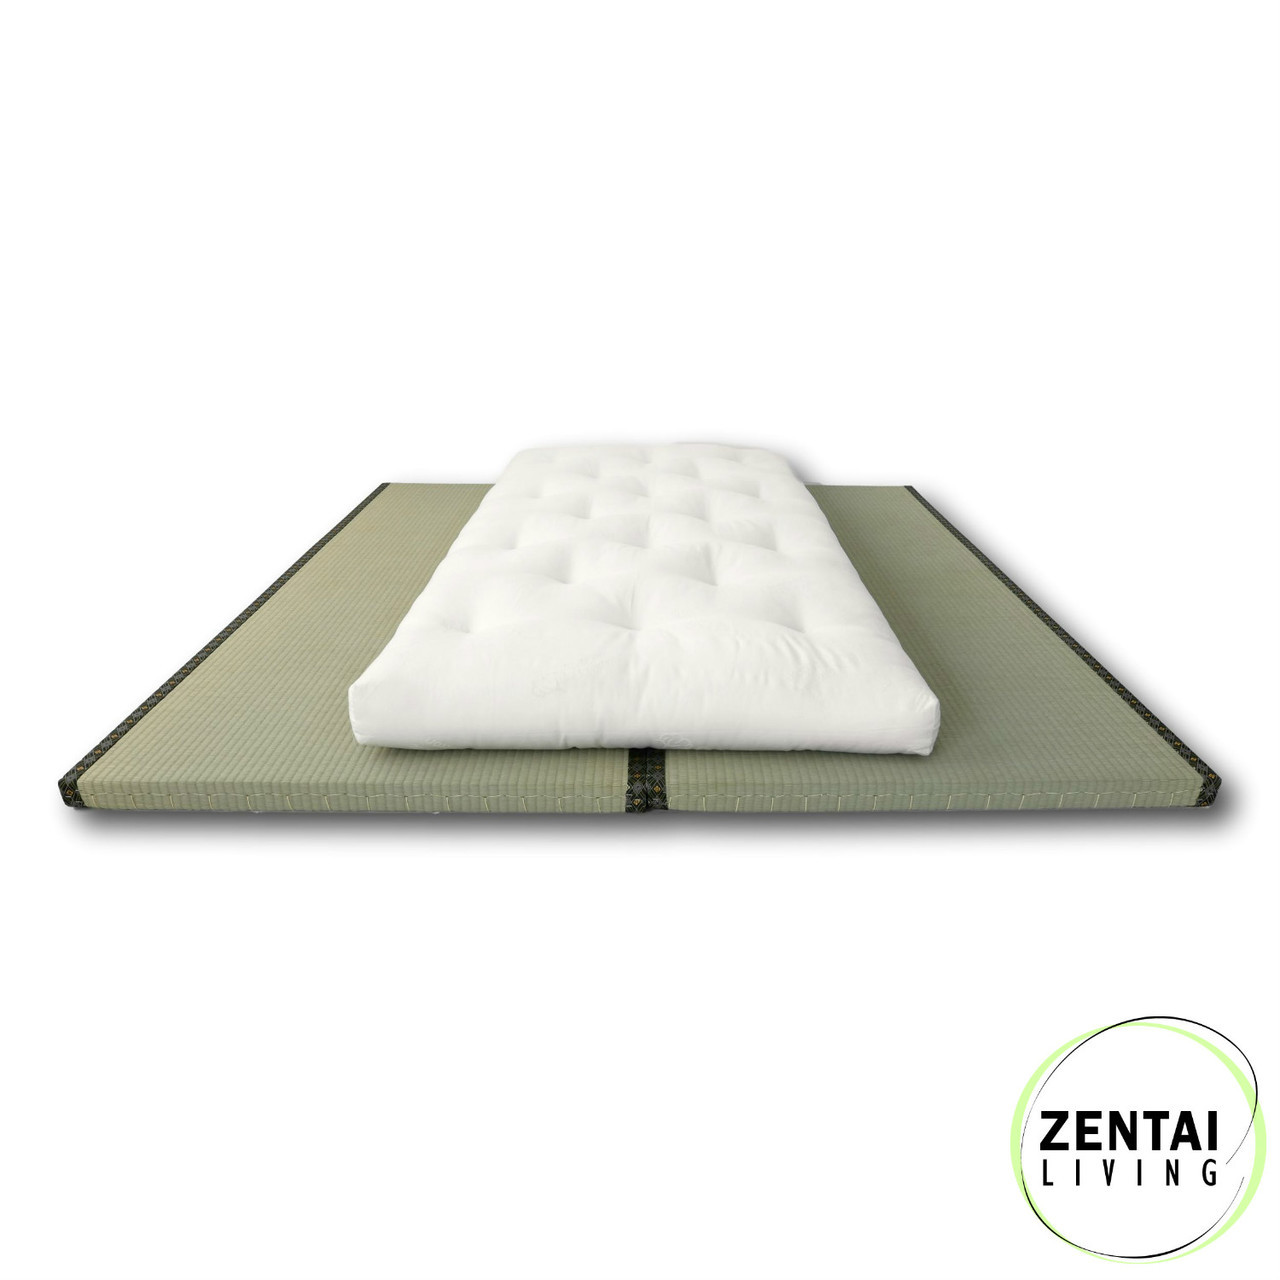 Tatami: the traditional Japanese bed base for your Futon. 100% natural.